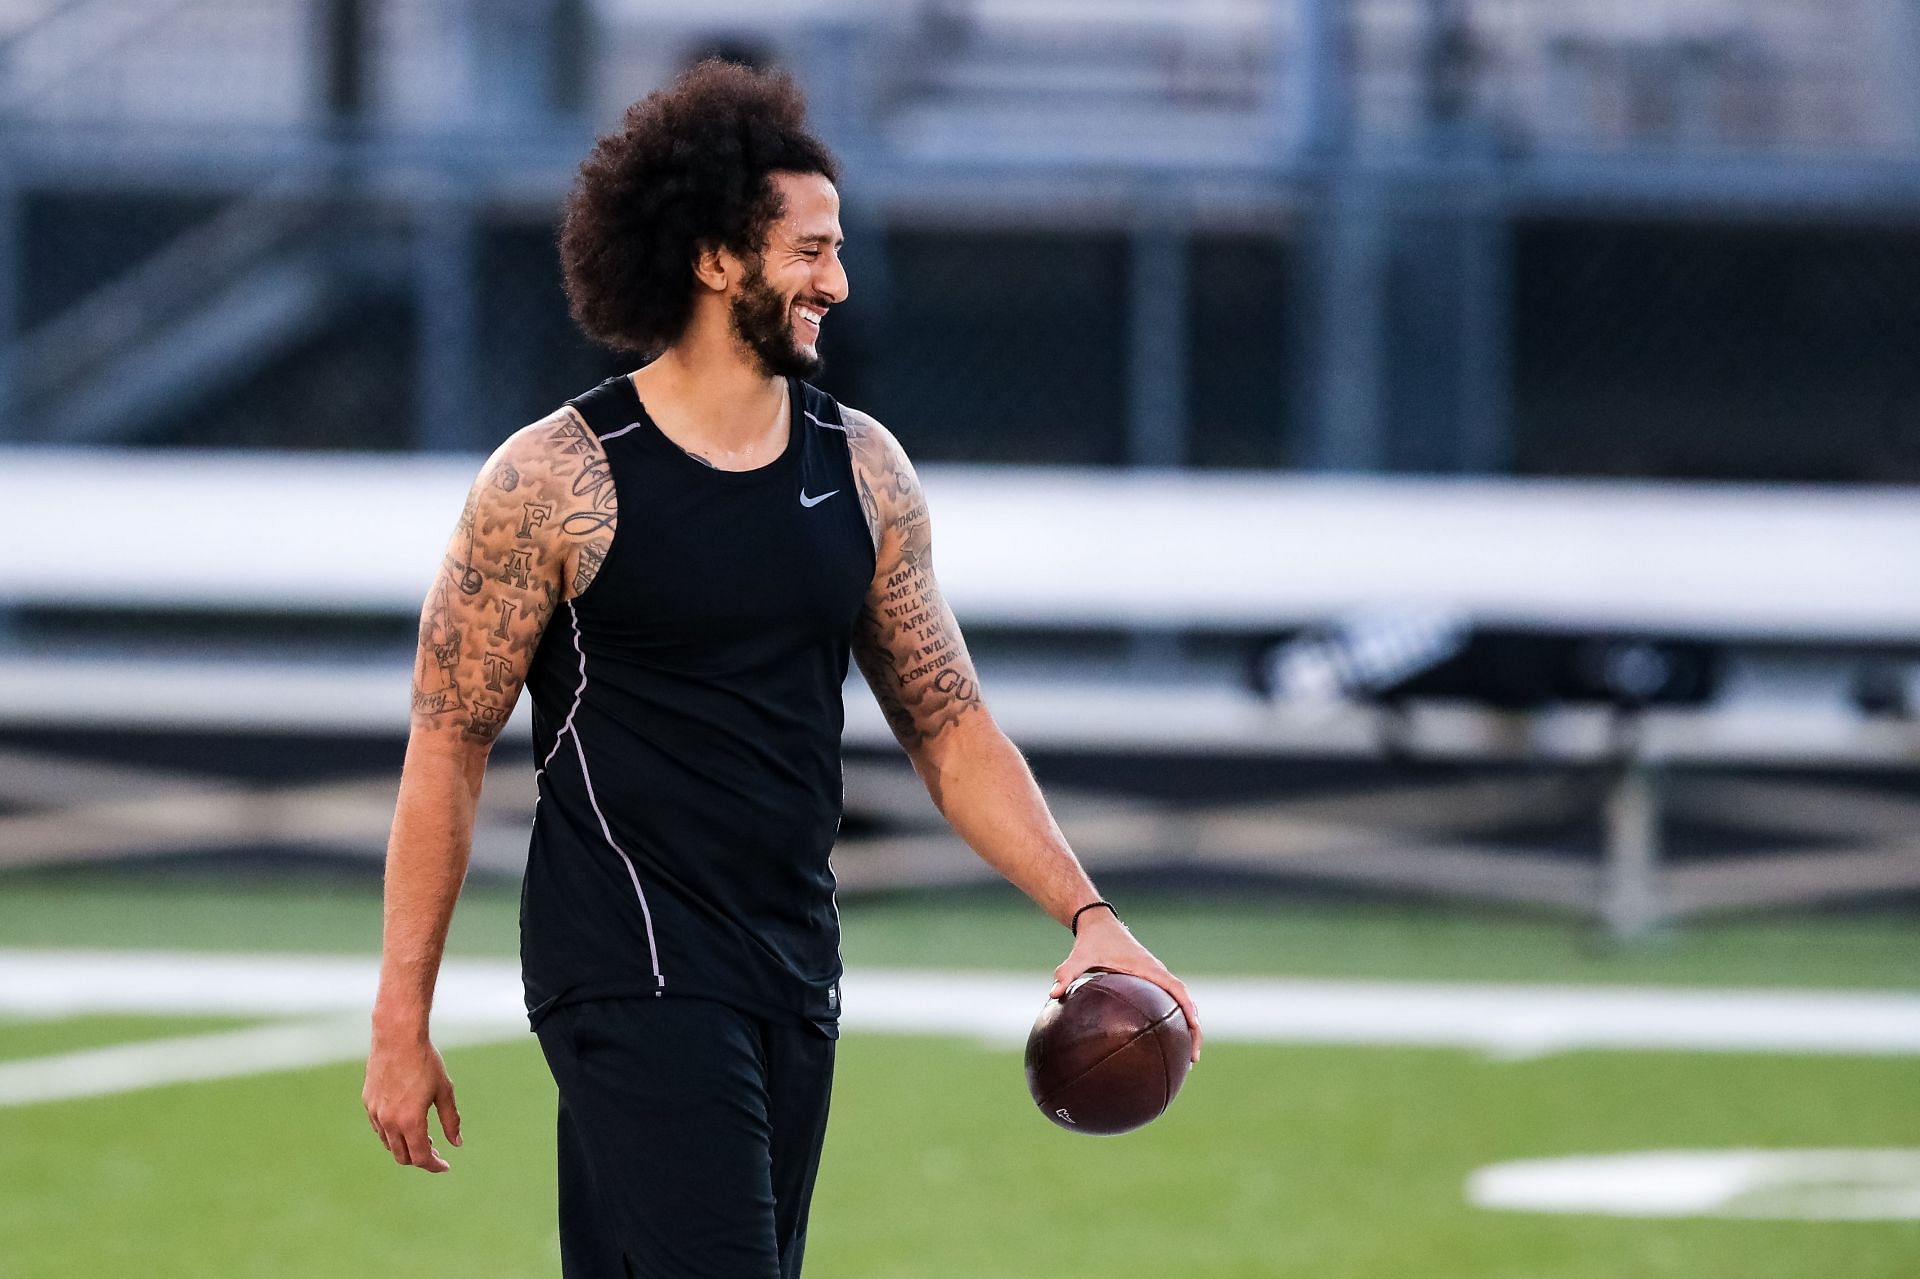 Colin Kaepernick has been attempting a return to the NFL